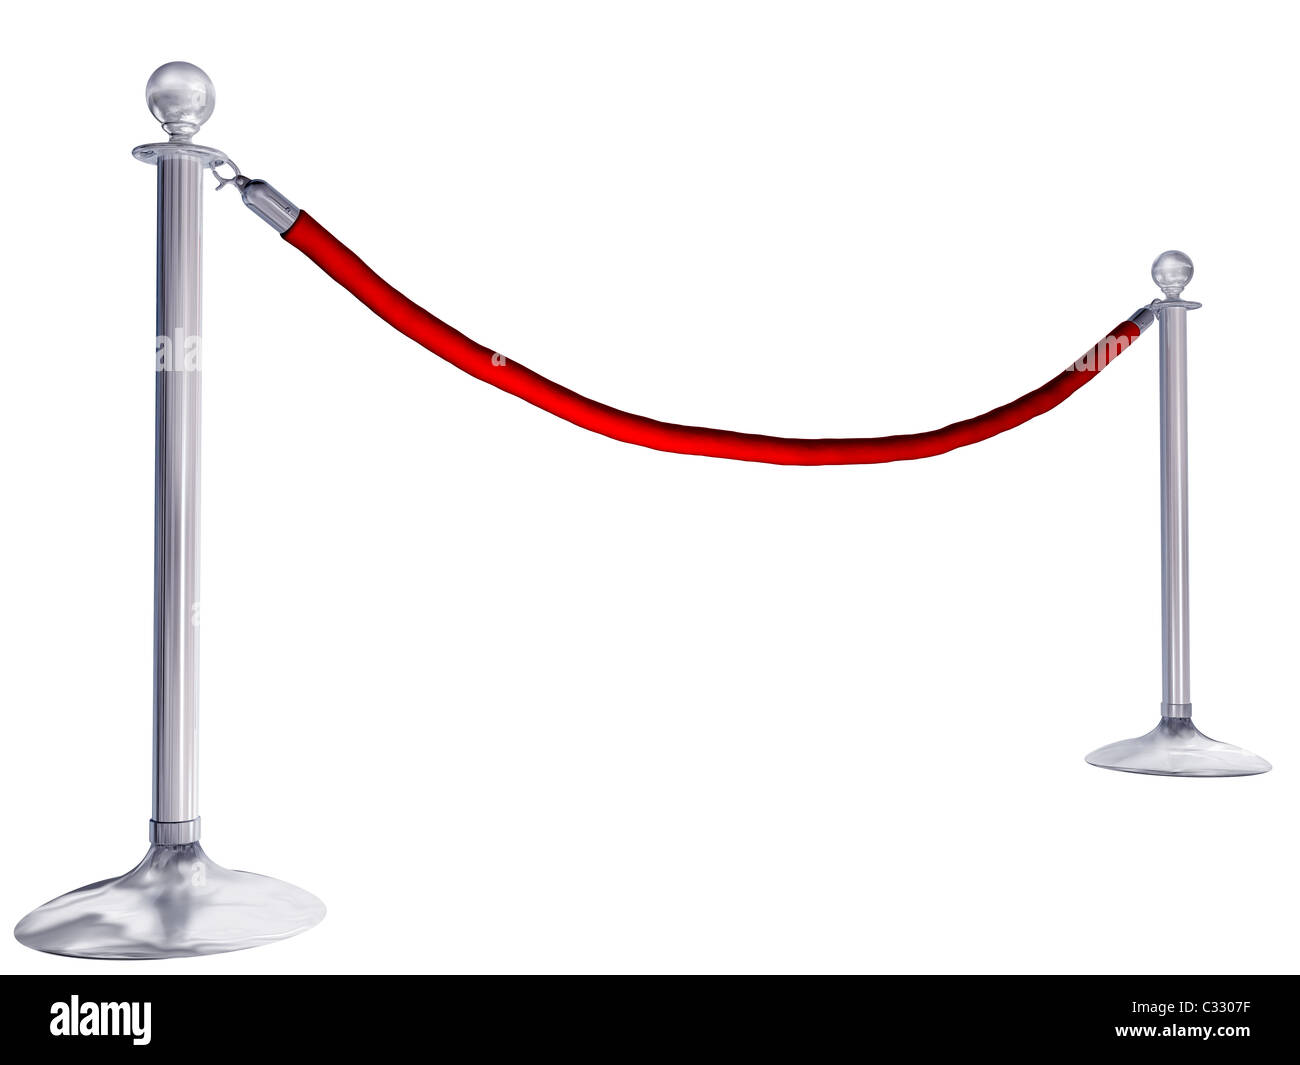 Isolated illustration of velvet rope and stands Stock Photo